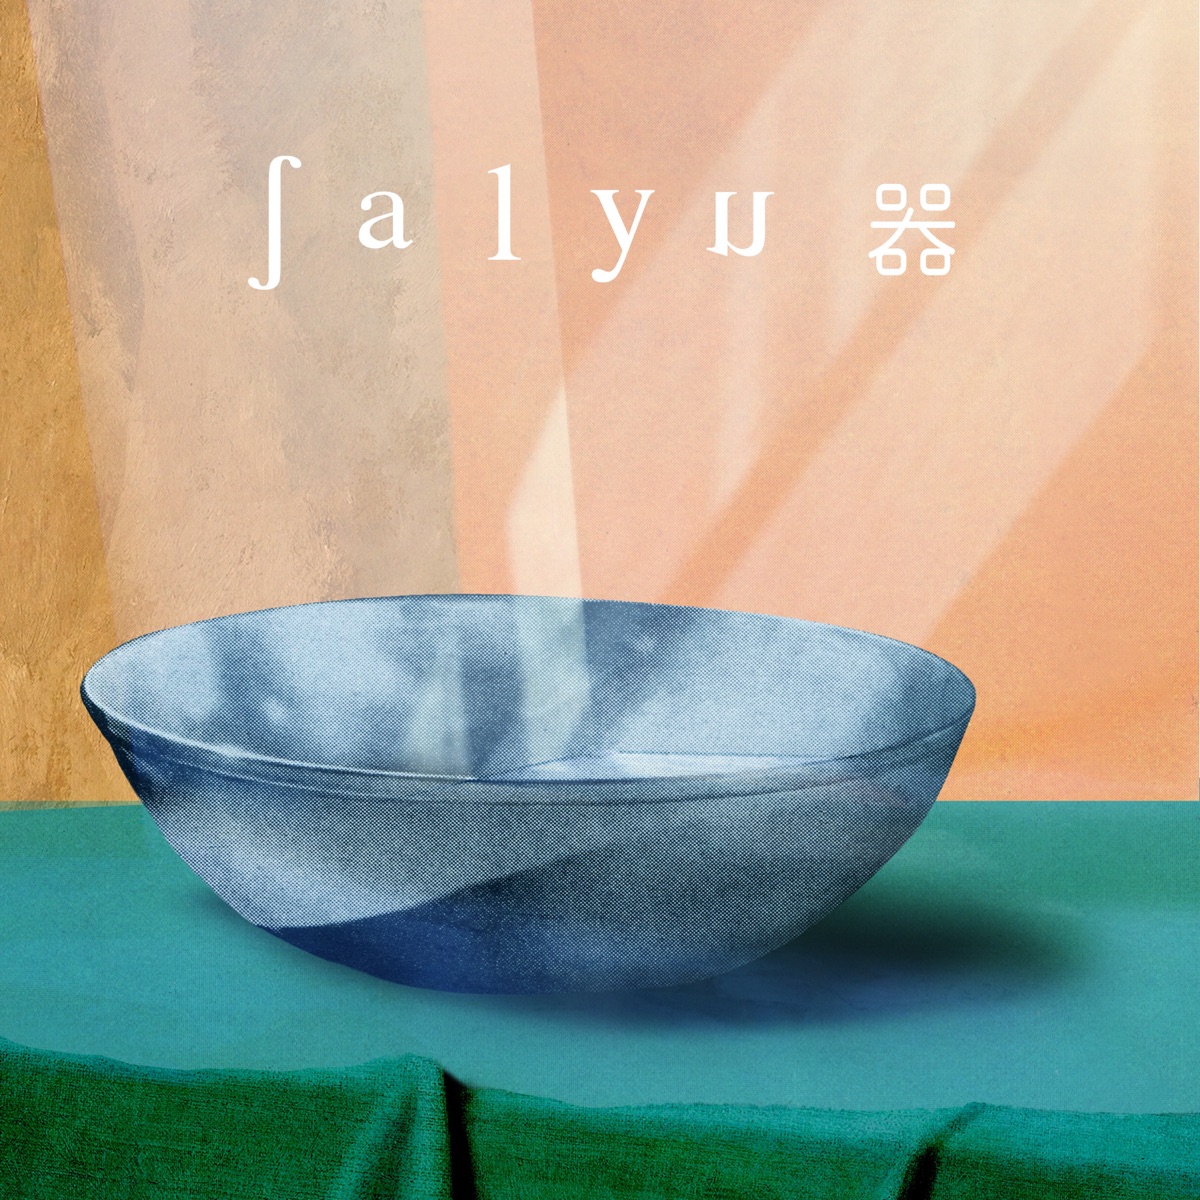 Cover art for『Salyu - 器』from the release『Utsuwa